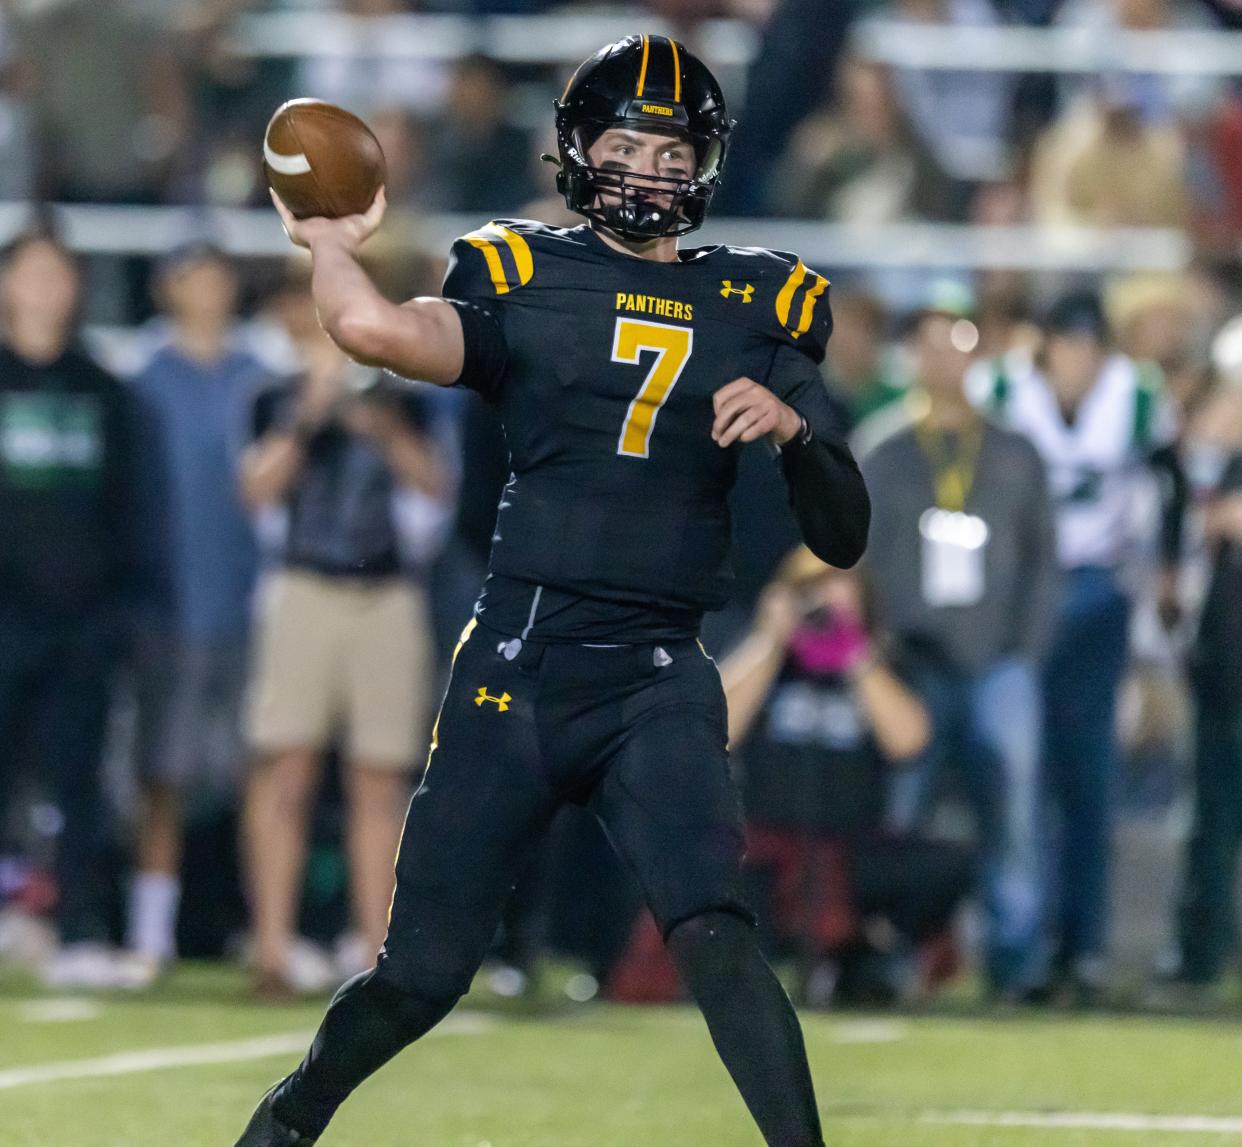 Sophomore Brady Smigiel is likely to hold most, if not all, of Newbury Park High and Ventura County passing records by the time he's done with his high school career.